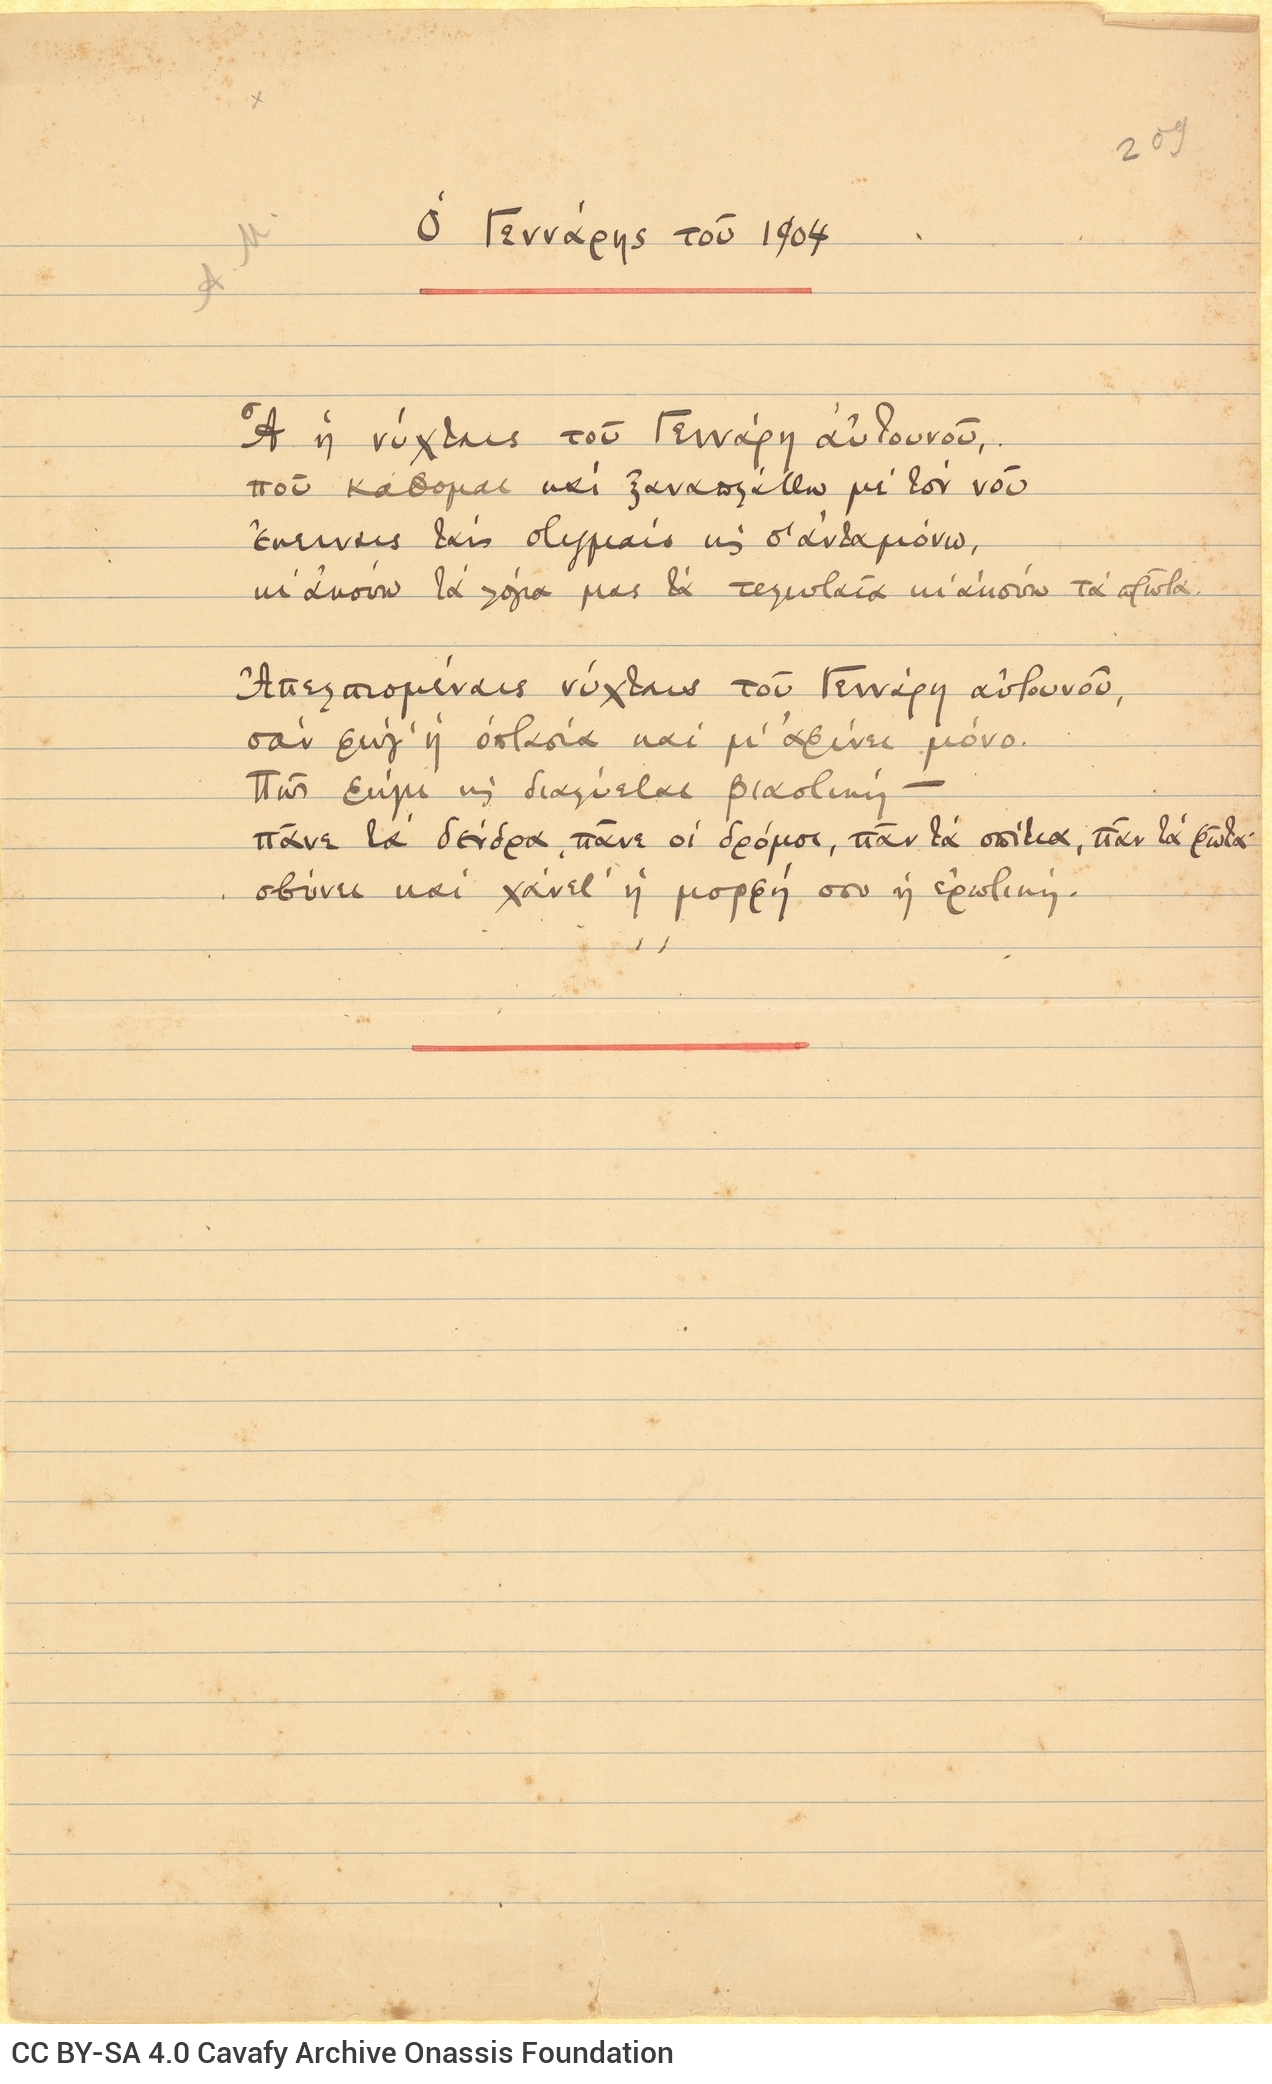 Manuscript of the poem "January of 1904". The title has been underlined and there is a line in red ink below the poem. She